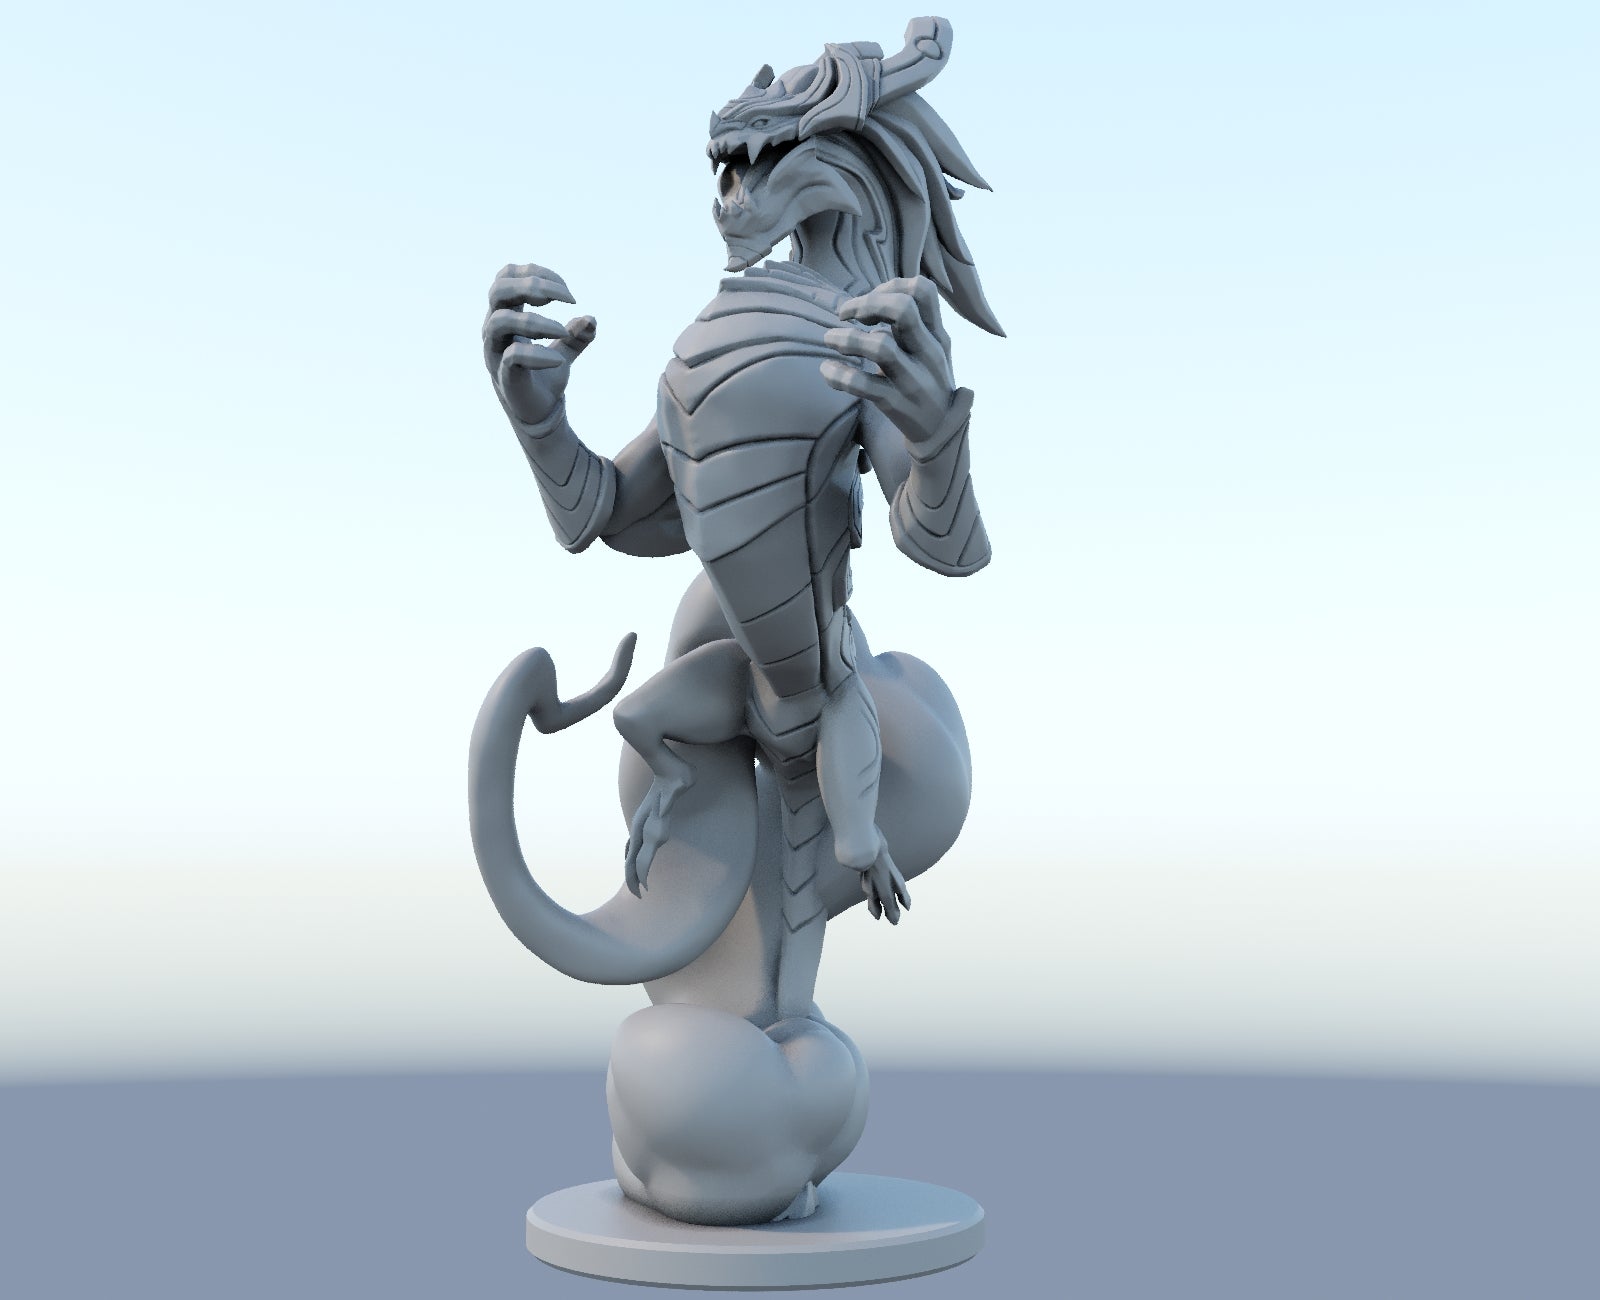 Aurelion Sol 3D-printed League of Legends champion figure. Decorate your gaming setup or home with your favorite League of Legends champion! Choose between the unpainted version, perfect for you to paint yourself, or the hand-painted version by a professional painter. Order your figure today!